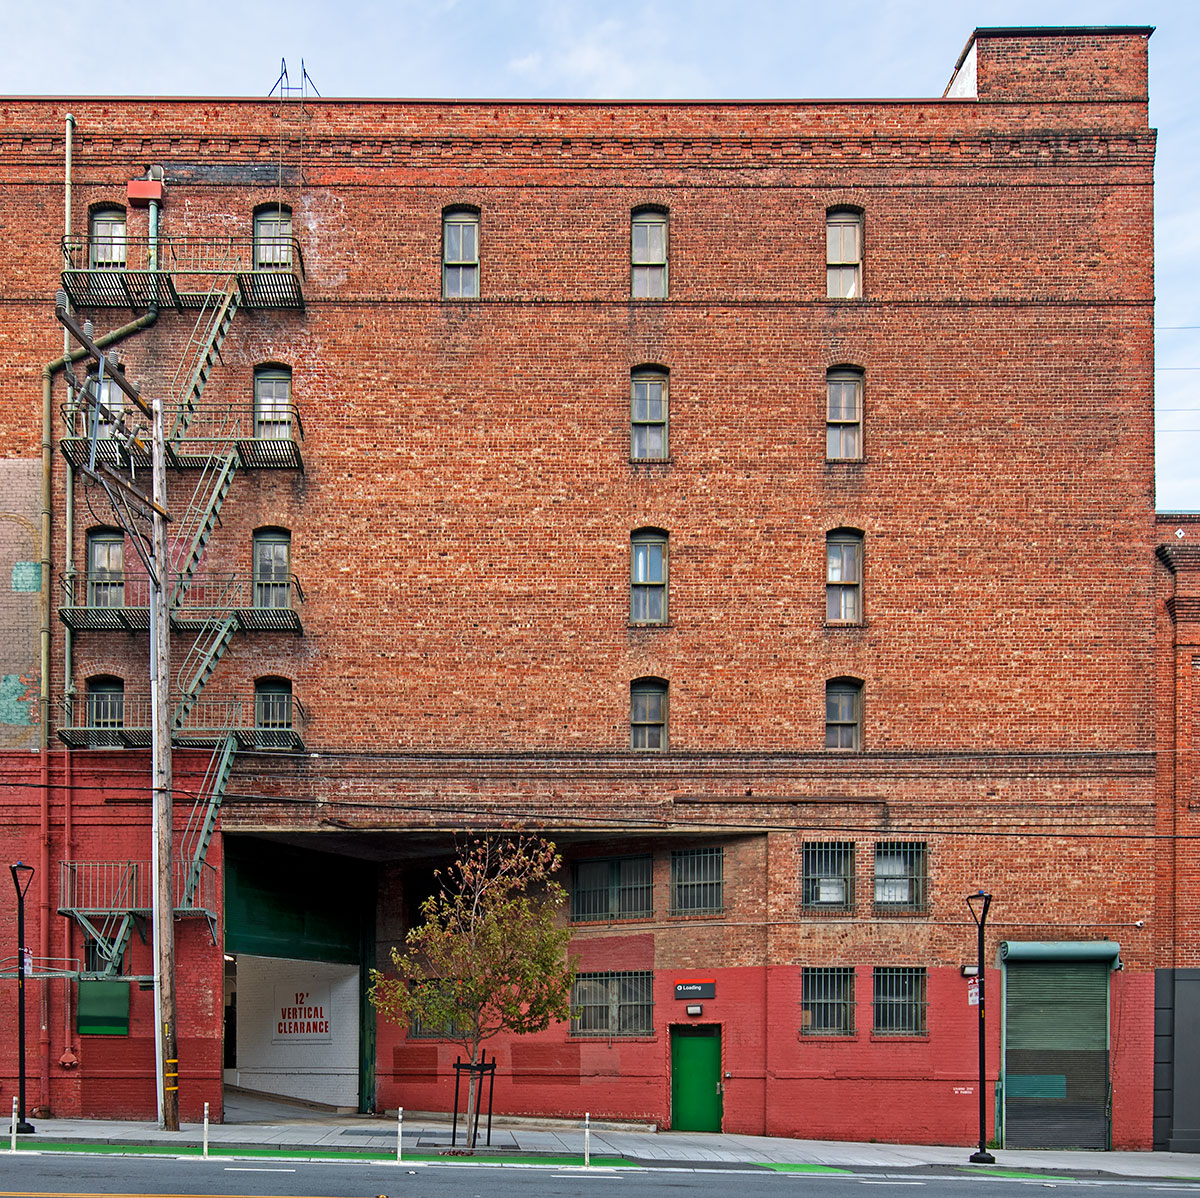 Second Street Elevation of the California Warehouse